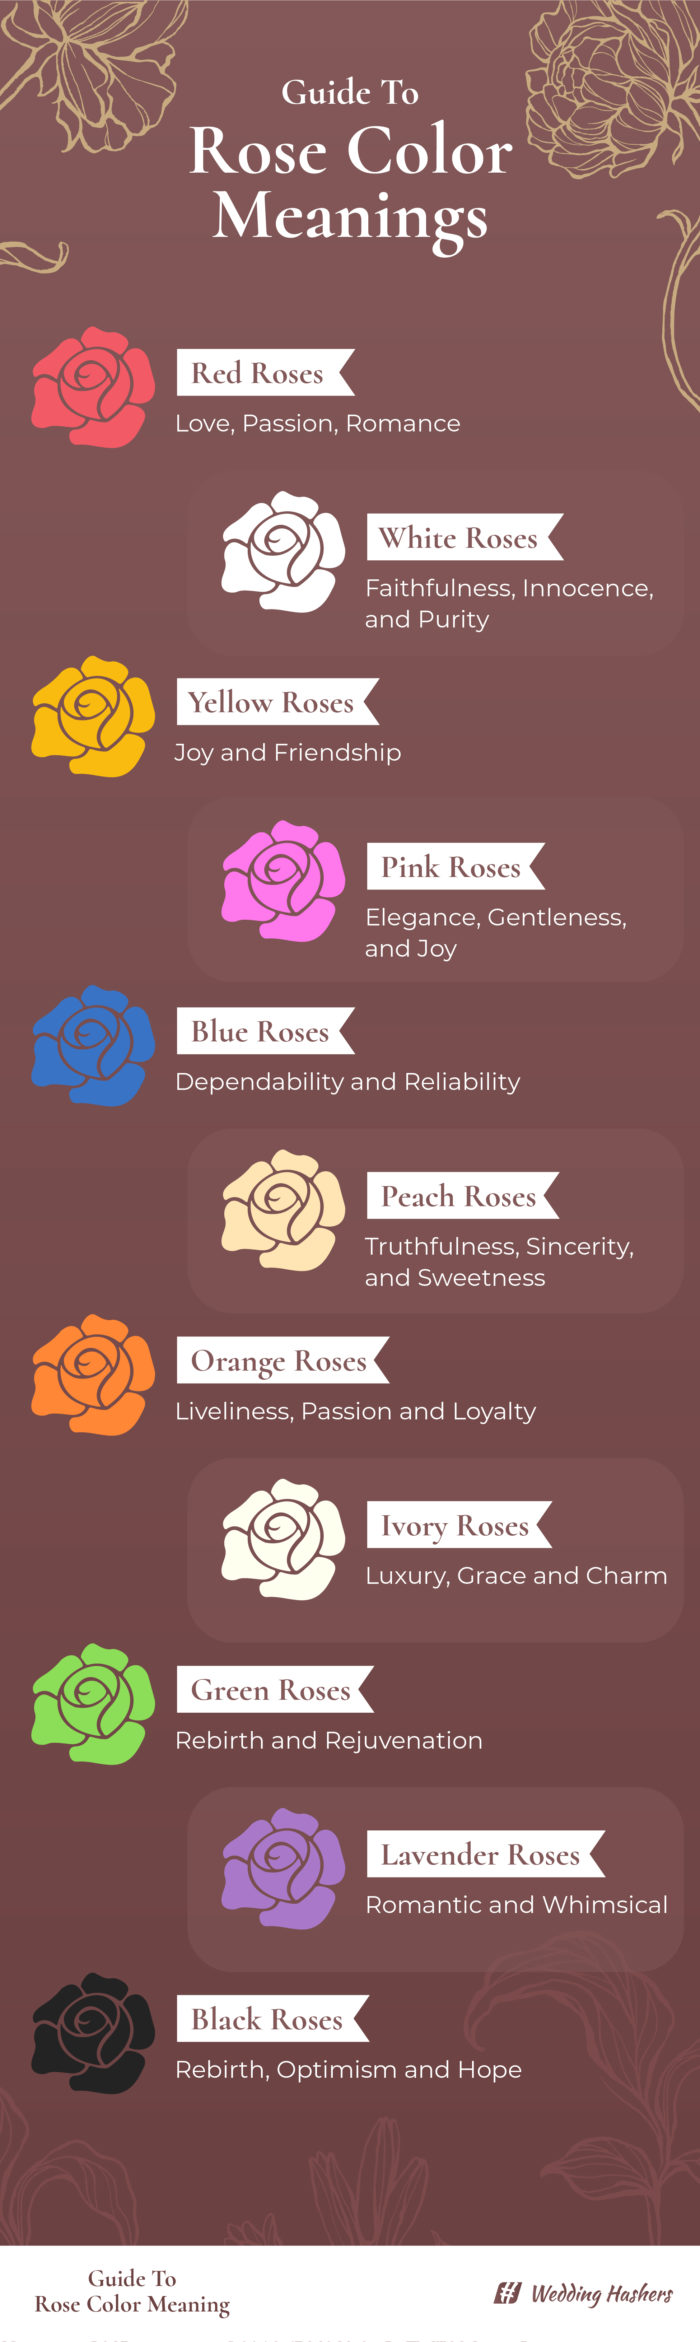 guide to rose color meanings infographic by wedding hashers